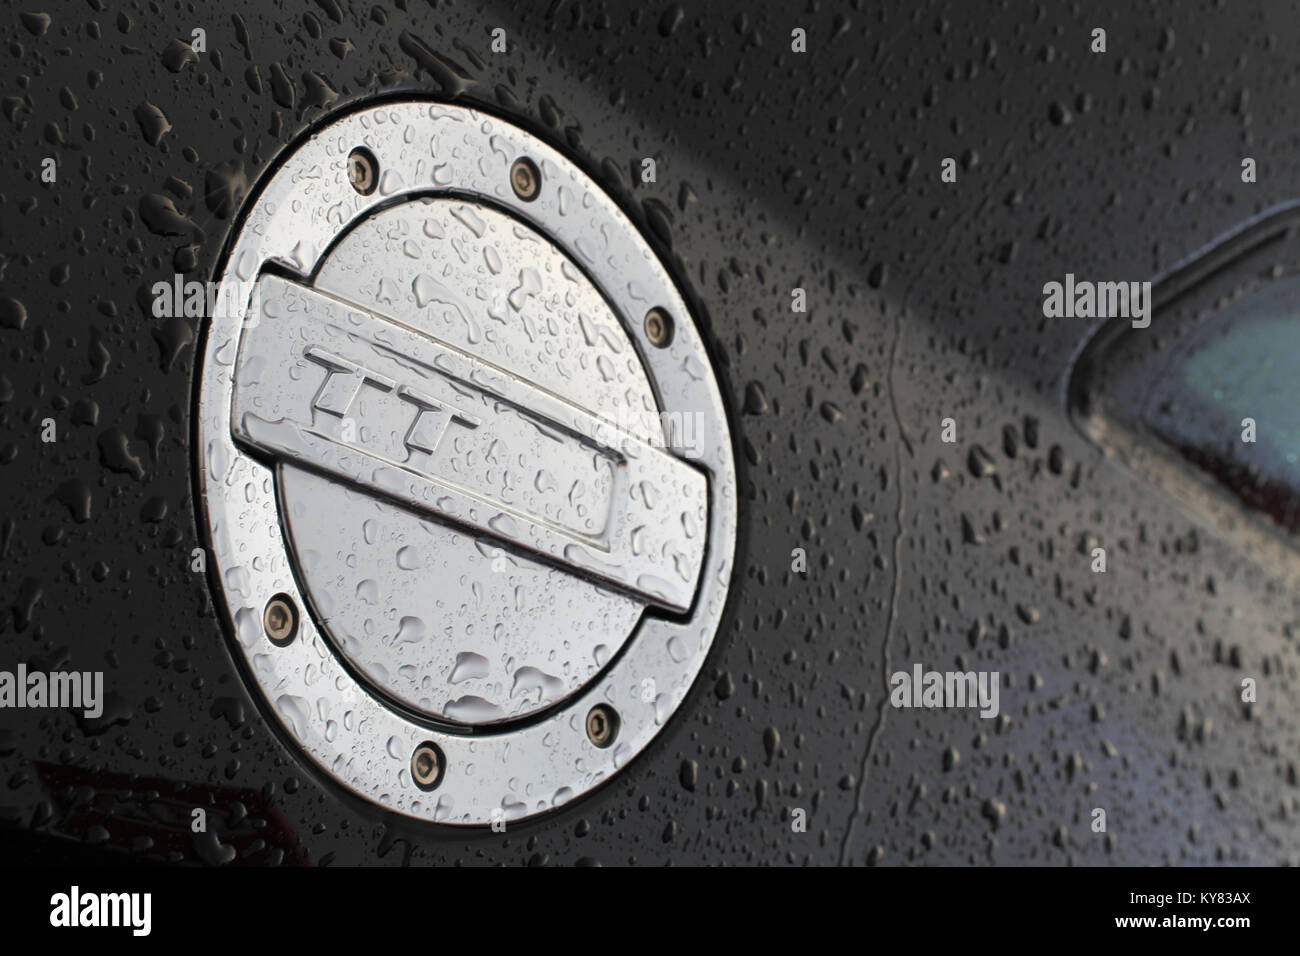 An Audi TT fuel cap cover covered in water droplets due to rainfall Stock Photo